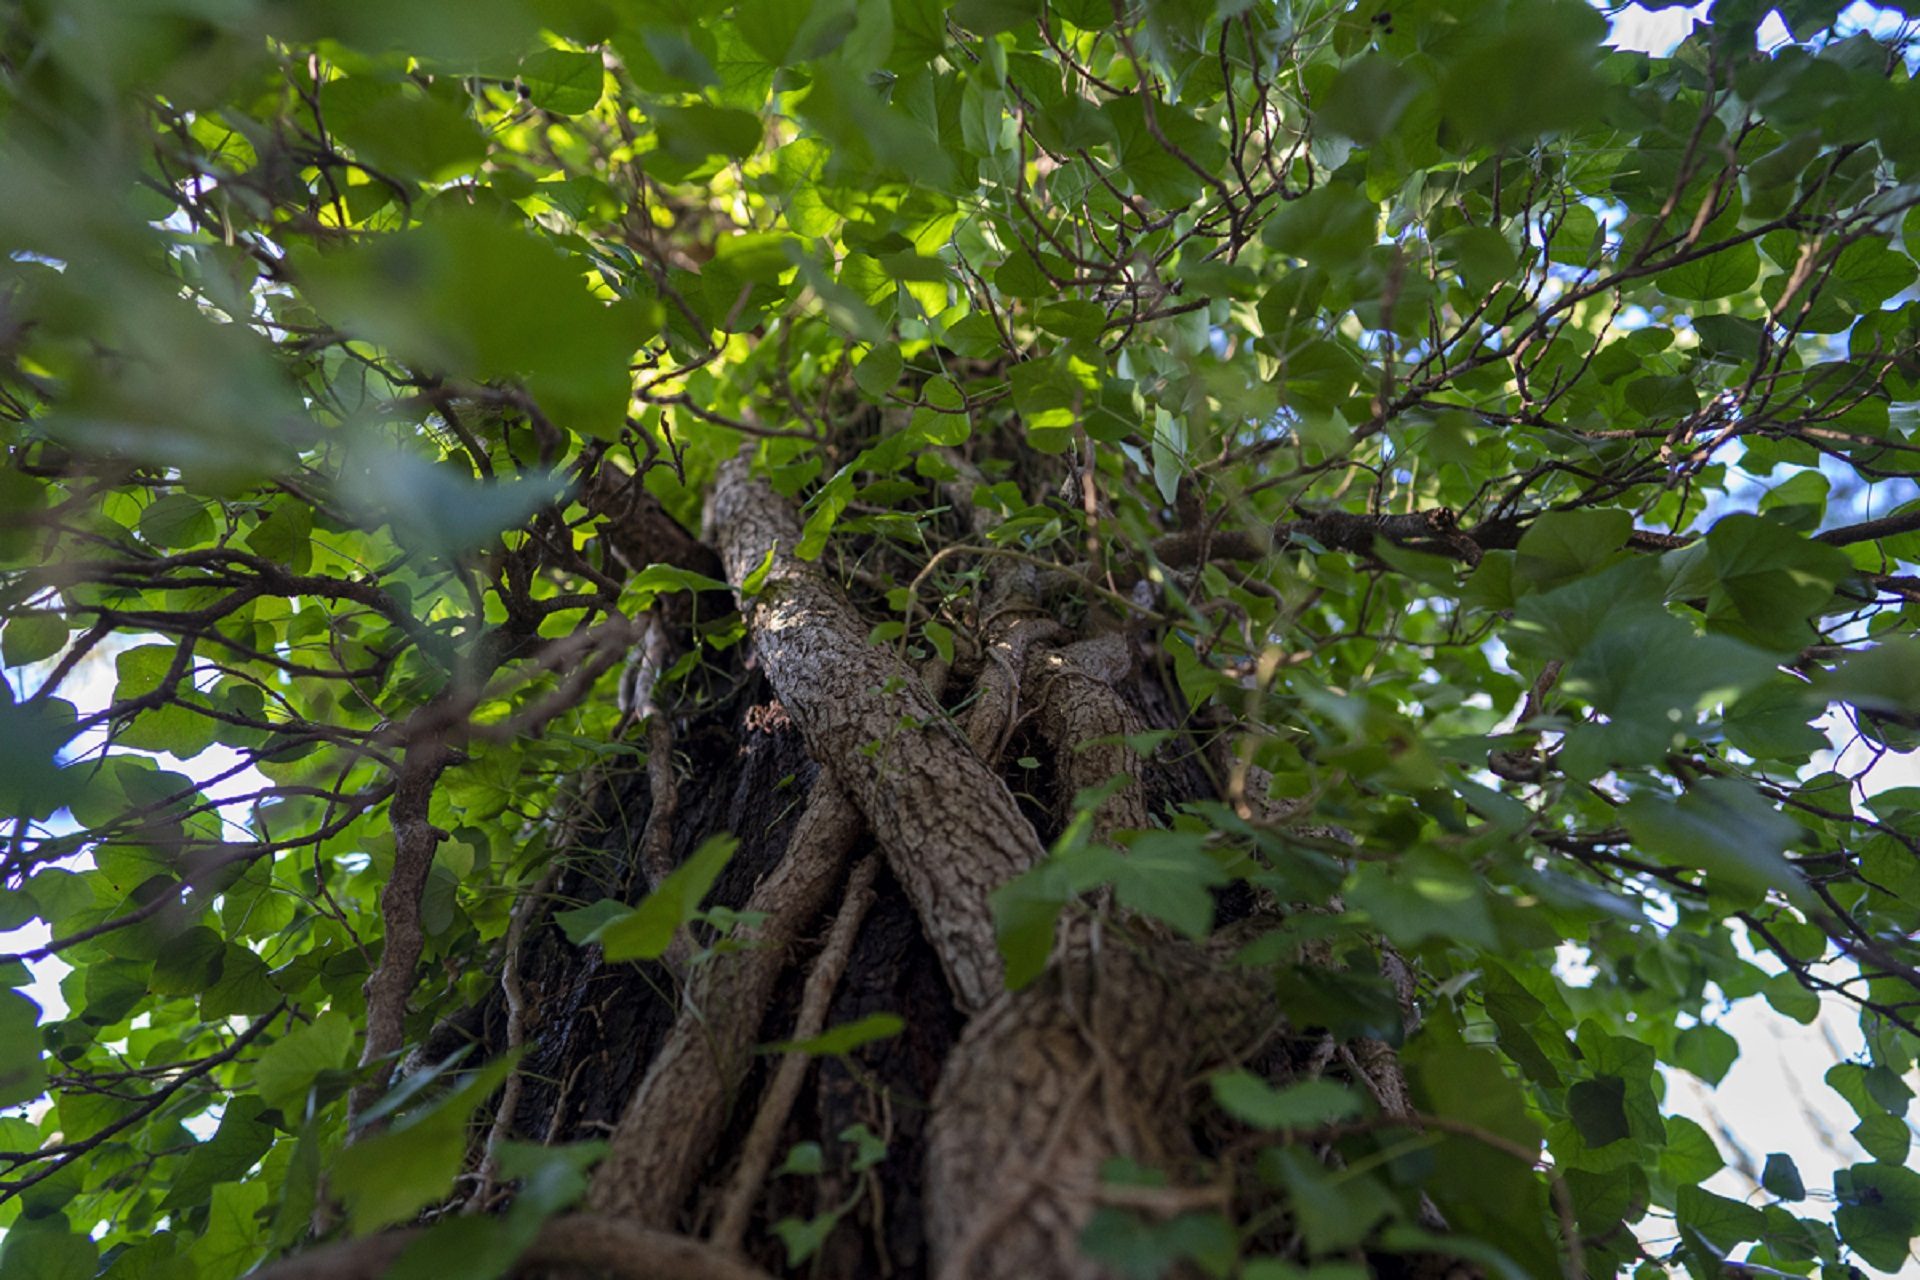 The ivy has formed its own trunk like structure squeezing the bark of the tree.